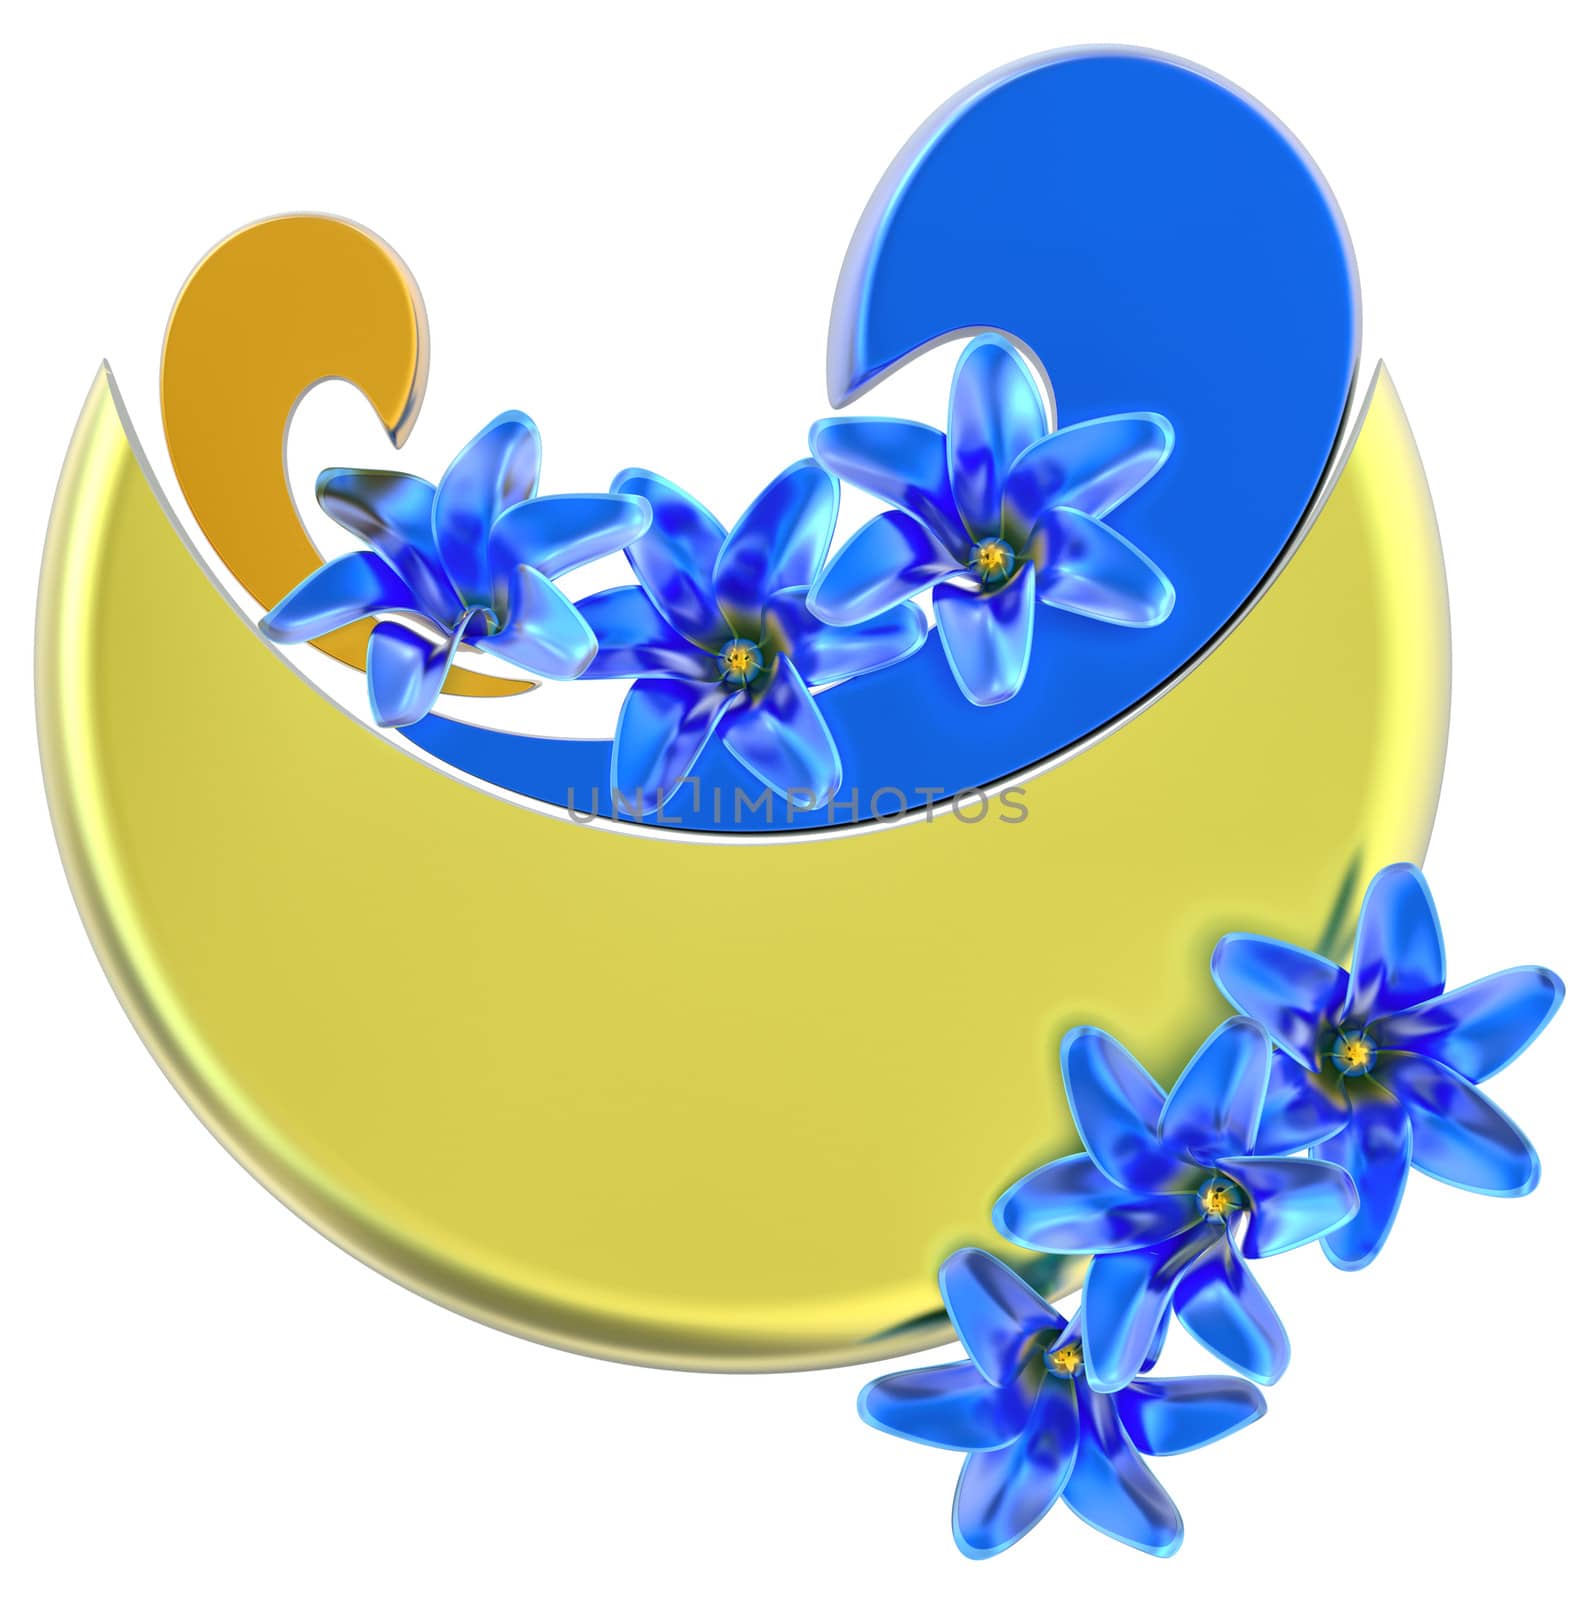 yellow and blue form with blue flowers